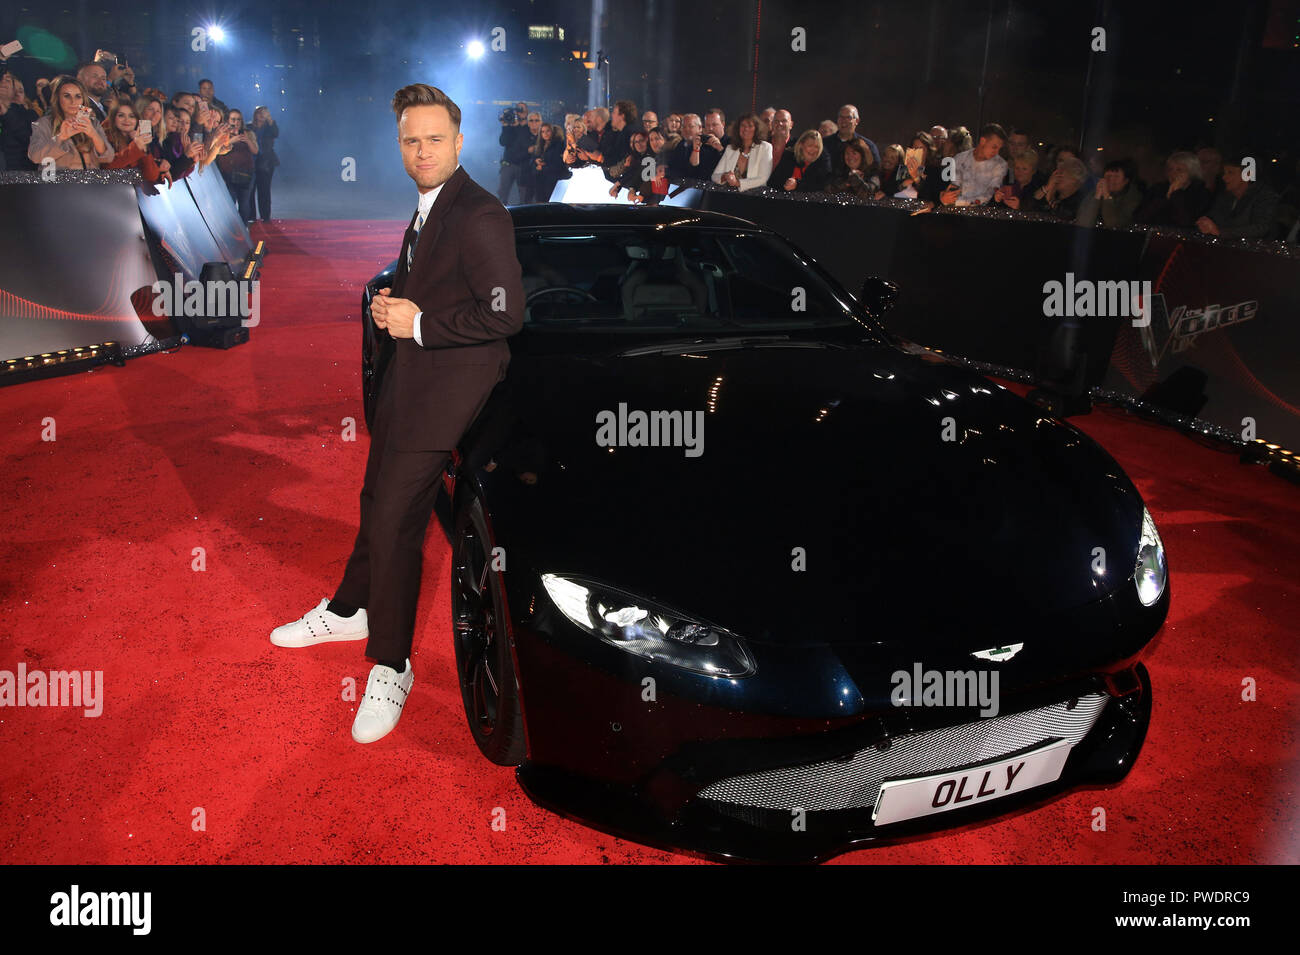 Coach Olly Murs arrives at MediaCityUK in Manchester for the auditions of  The Voice Stock Photo - Alamy